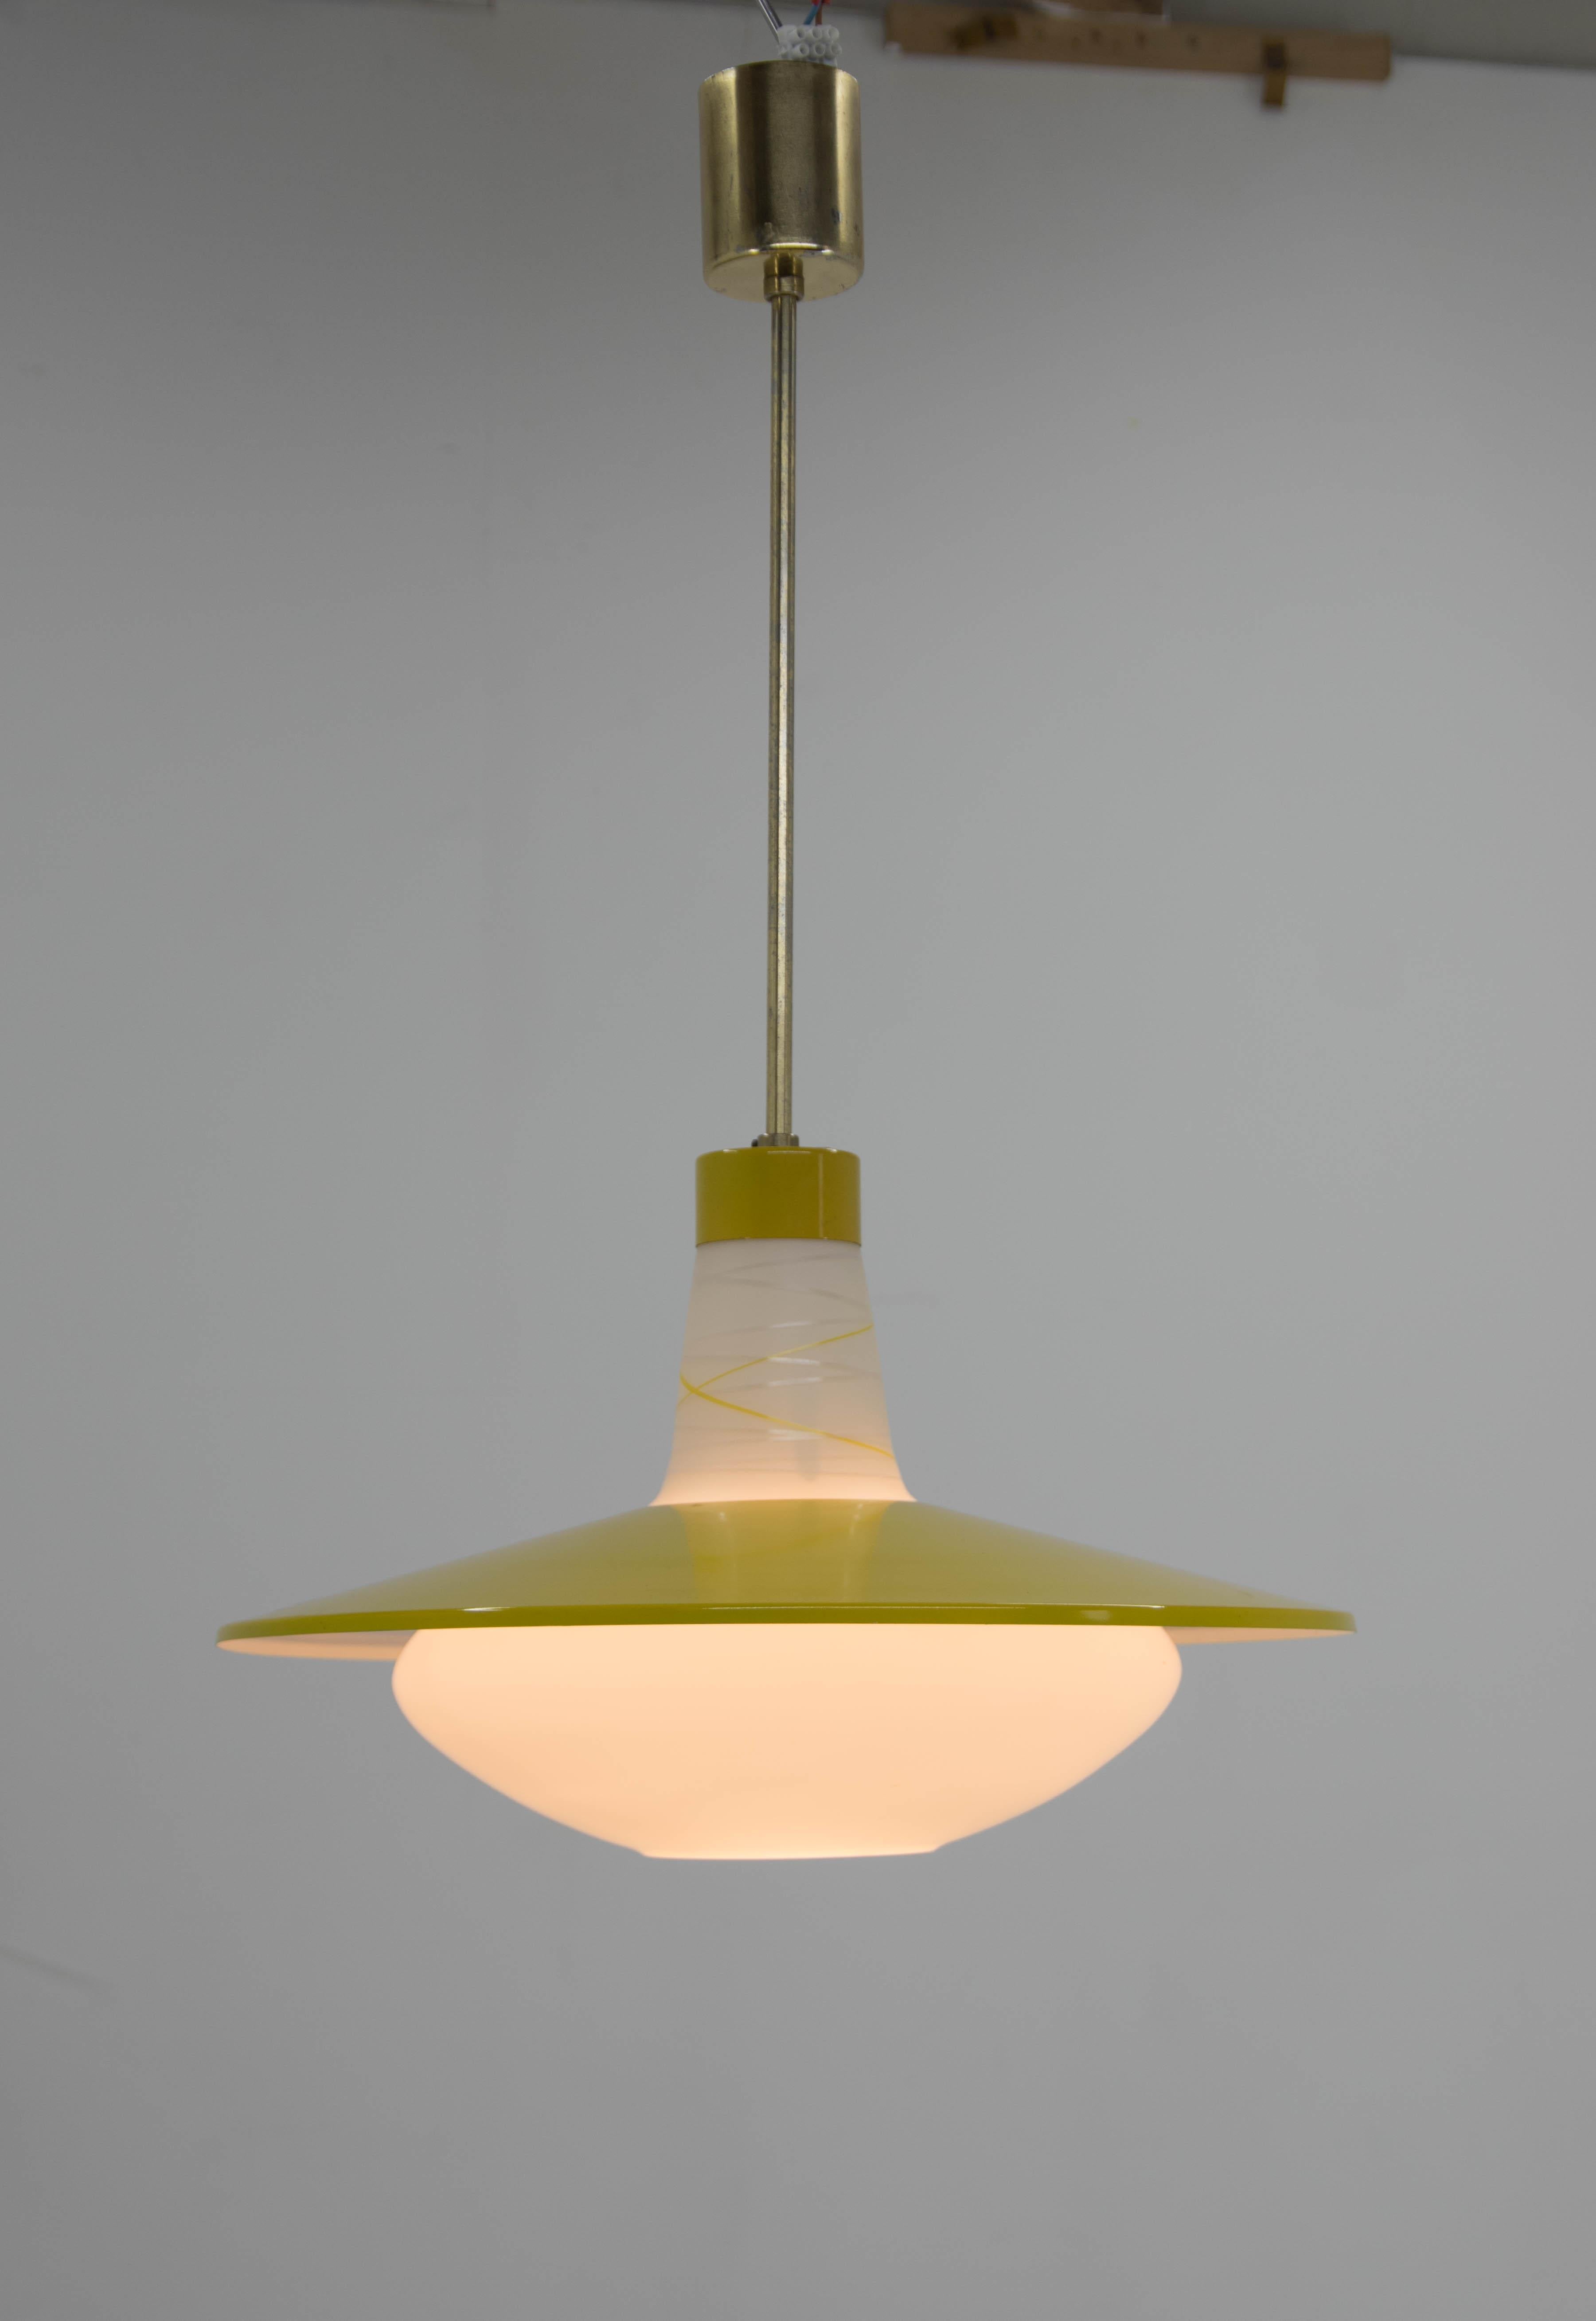 Design yellow pendant labeled by N.P. Kamenicky Senov.
Very good original condition.
1x60W, E25-E27 bulb
US wiring compatible.